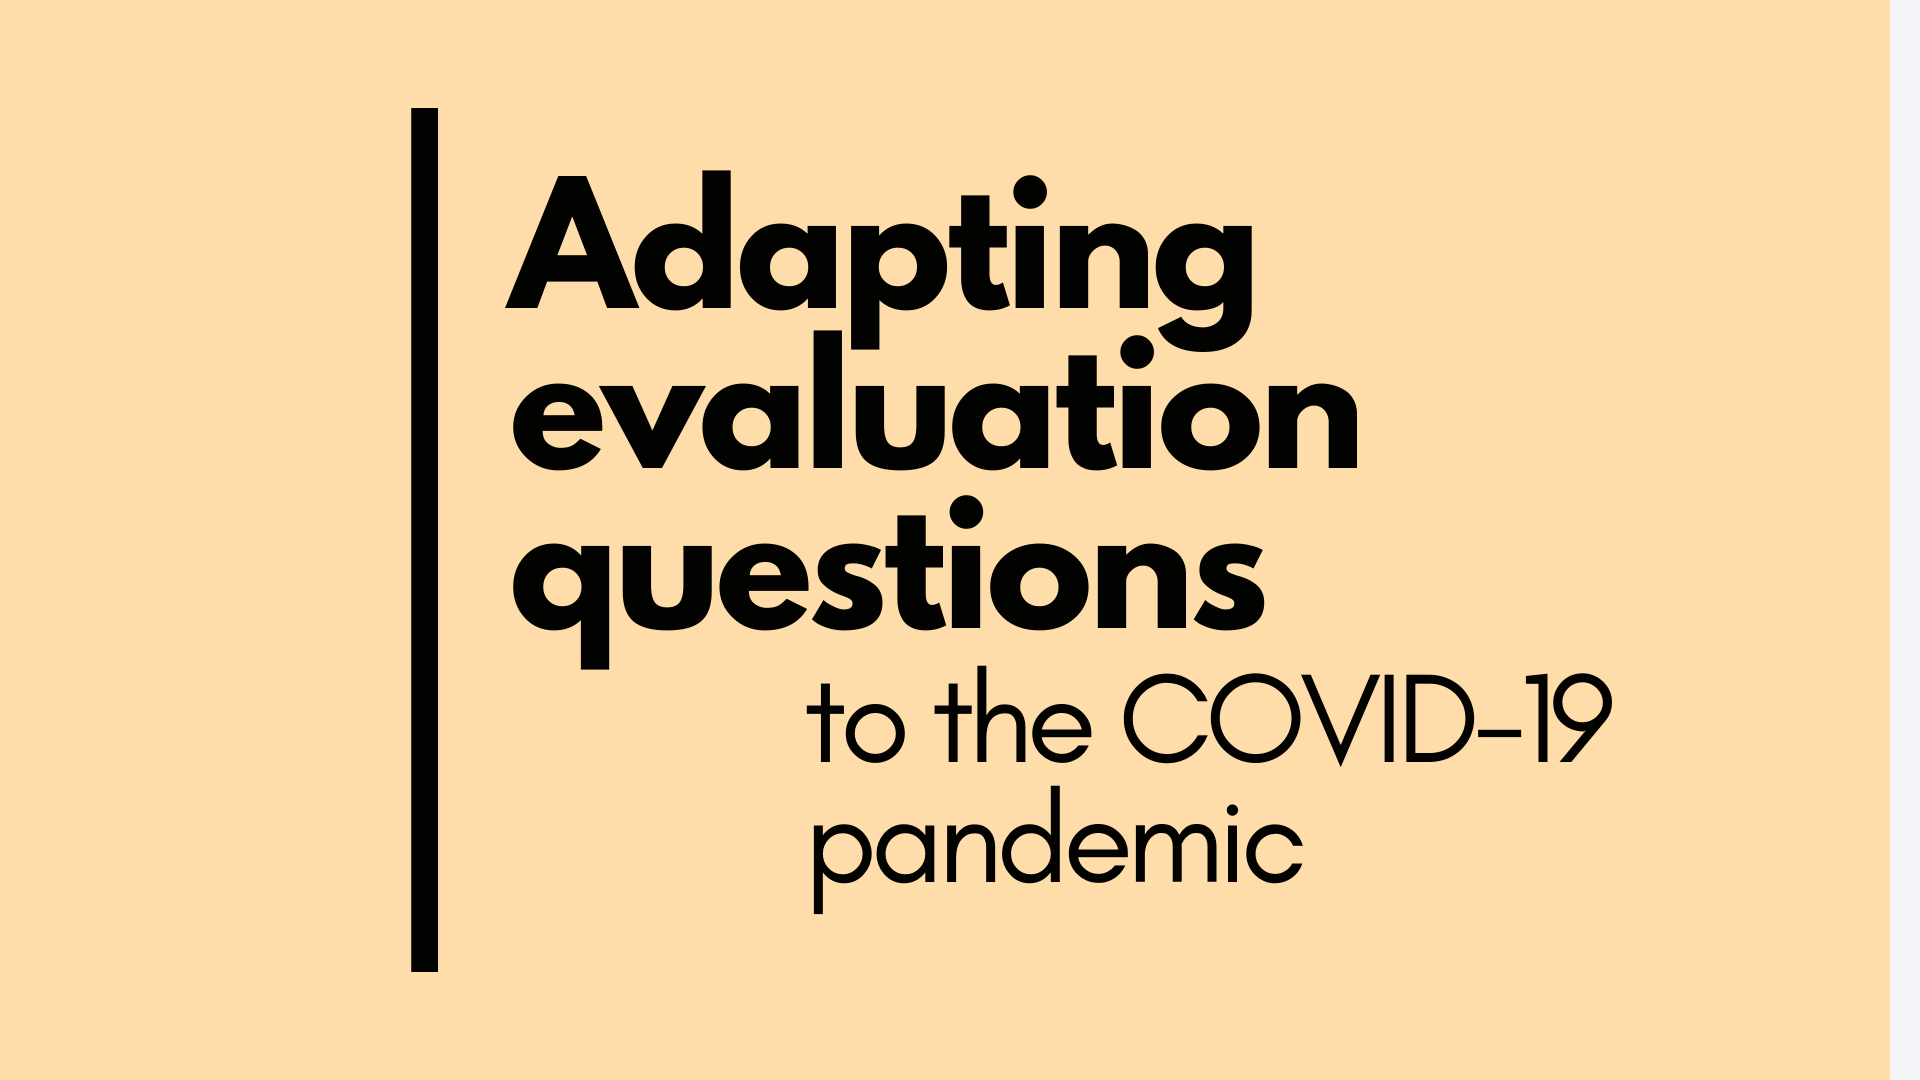 Adapting evaluation questions to the COVID-19 pandemic 